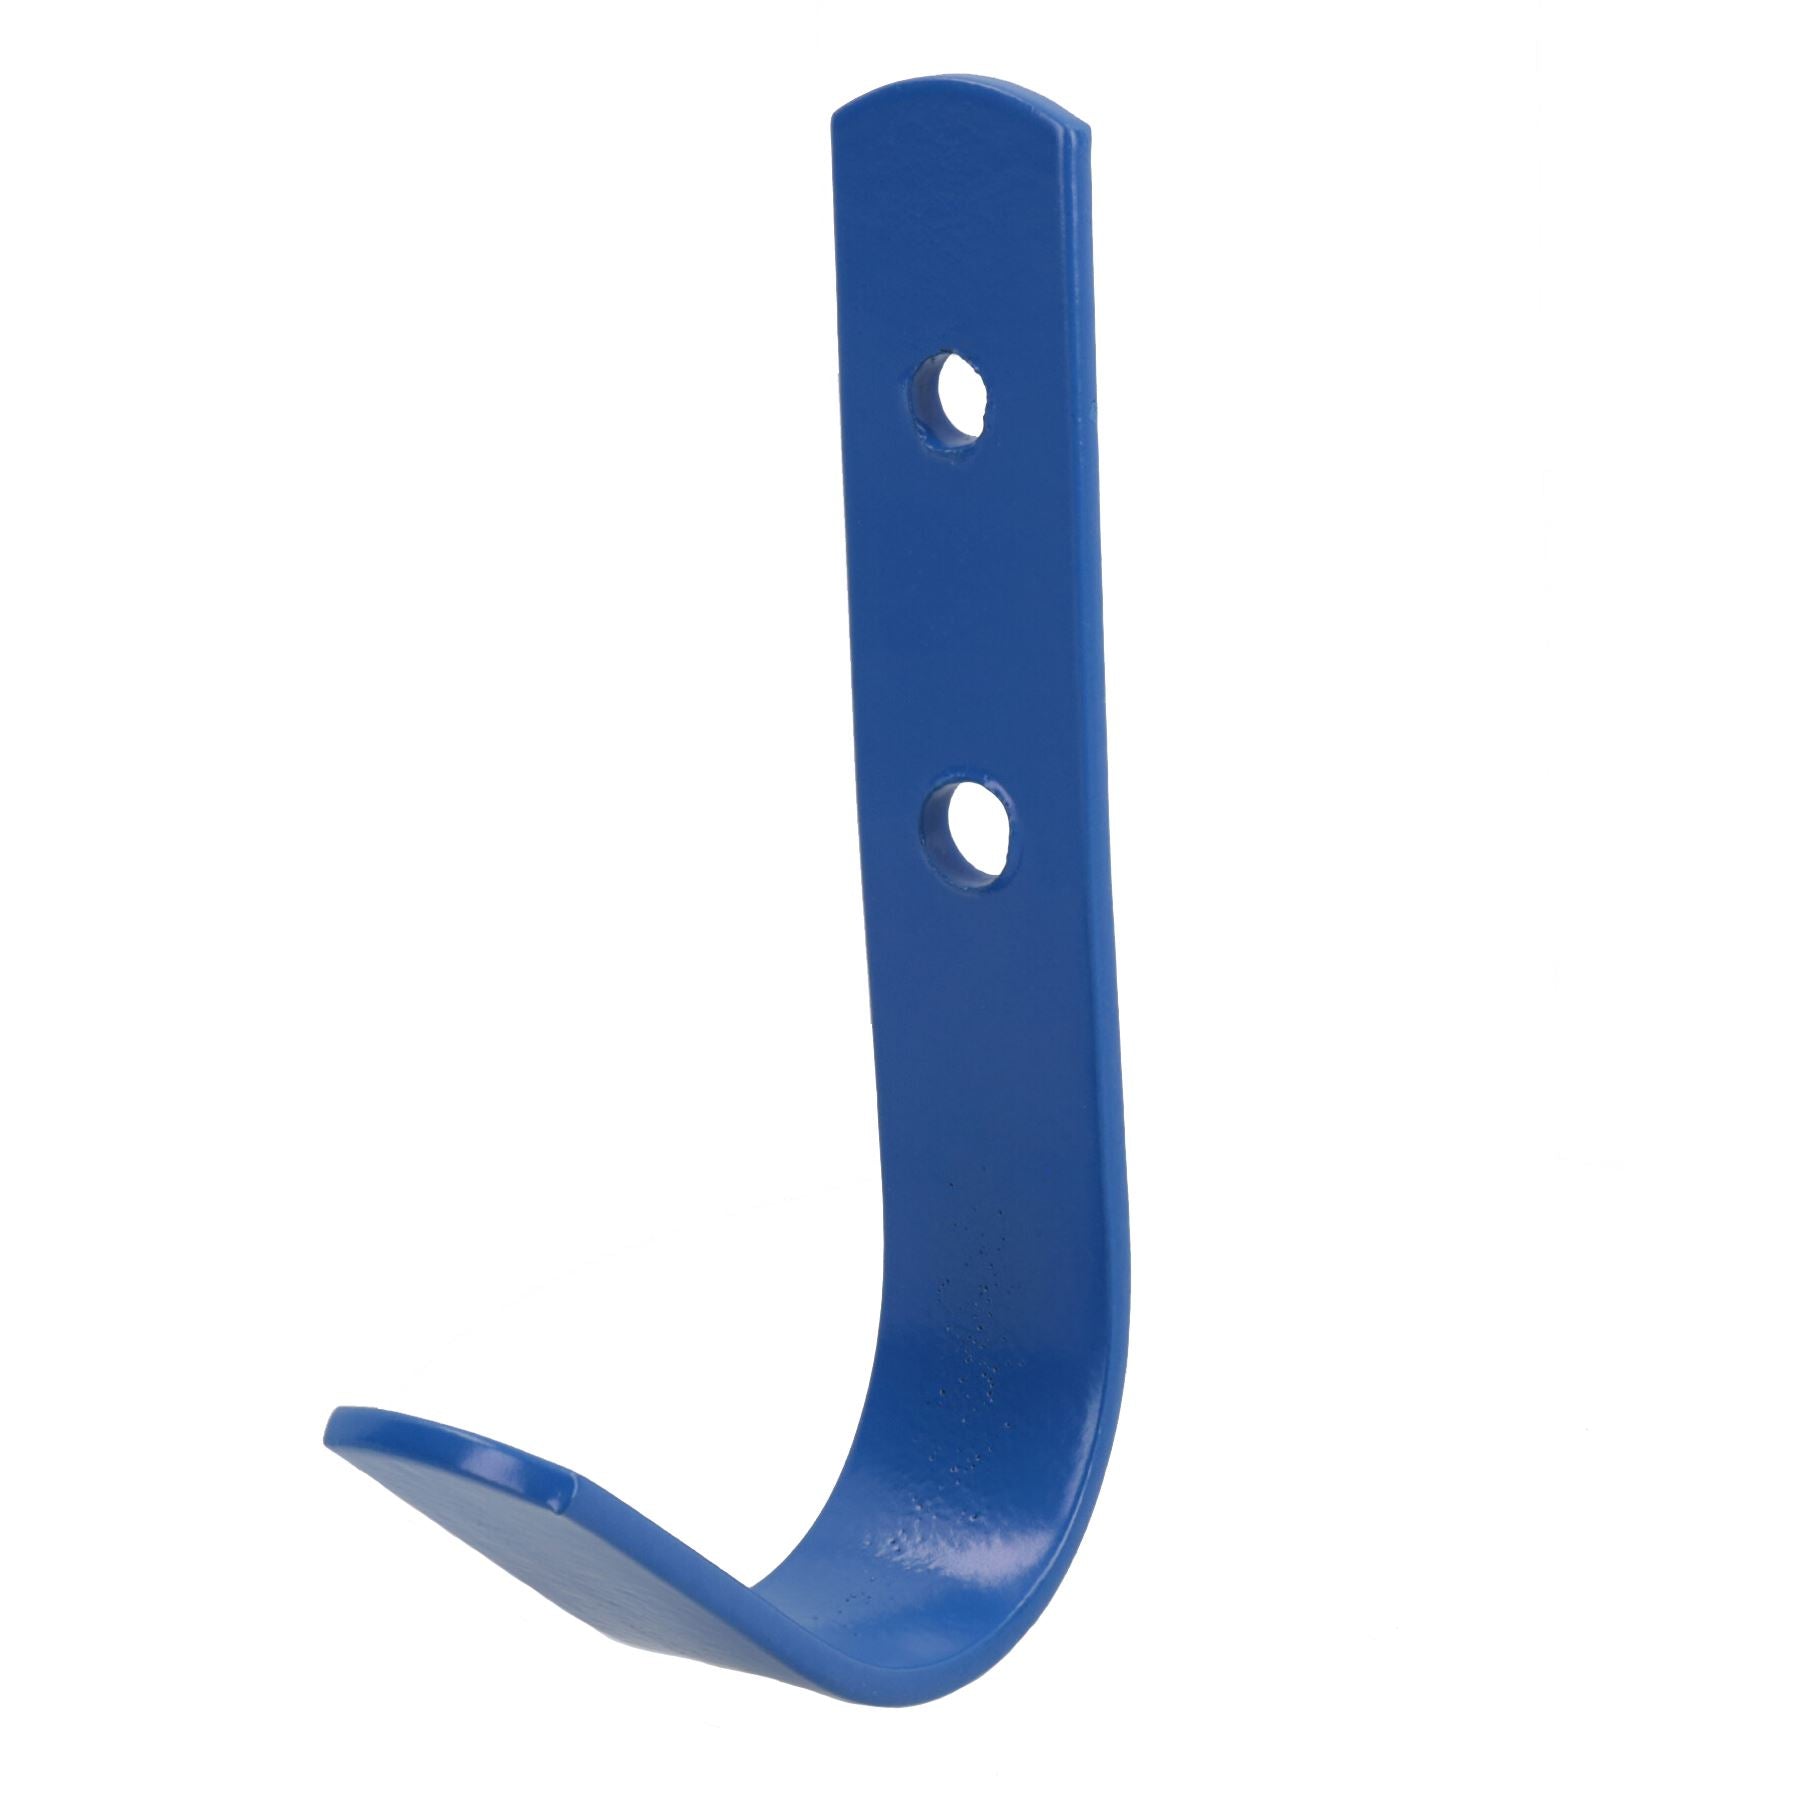 1 Heavy Duty Blue General Purpose Equestrian Horse Stable Tack Room Hook